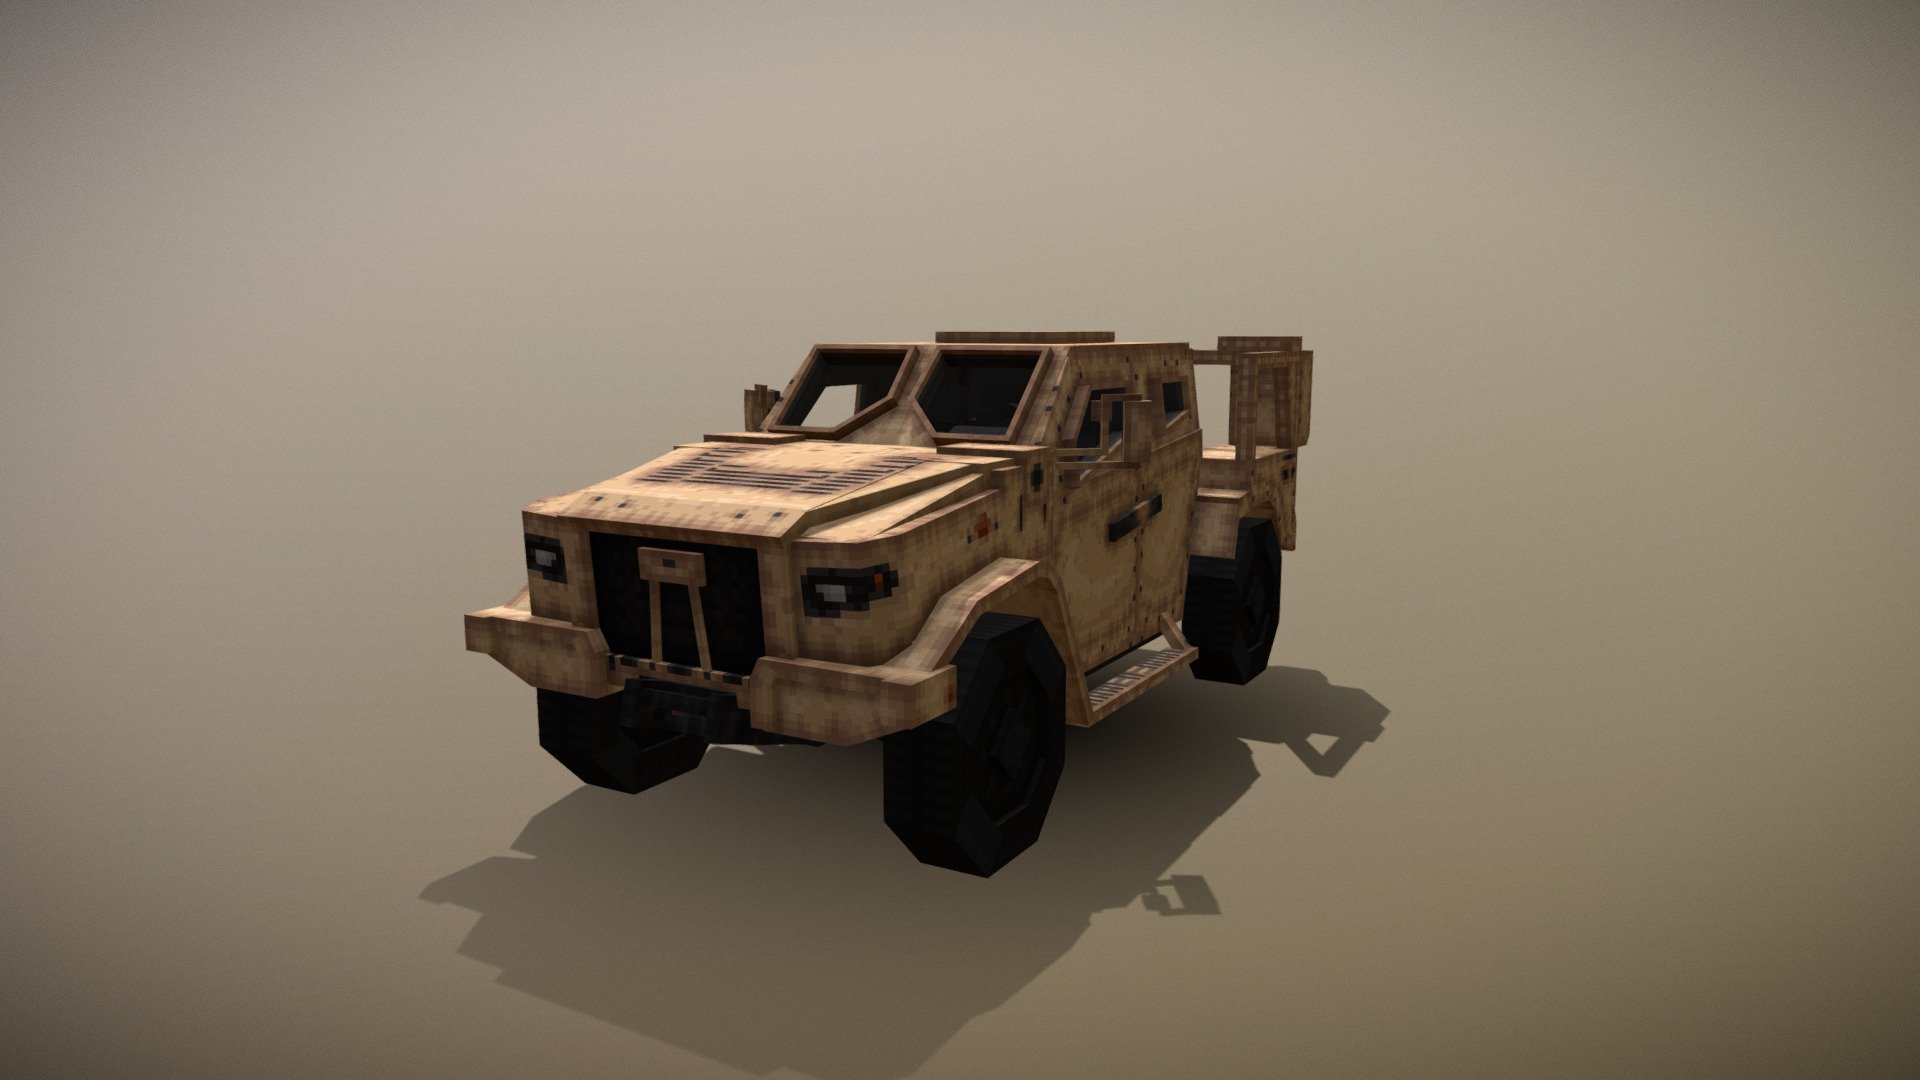 The JLTV M1280 vehicle made in collaboration with myself doing the texture and Wave Cherry making the model. Made in Blockbench and rendered here in Sketchfab. (Interior yet to be done) - Oshkosh JLTV M1280 - 3D model by SneakyDanny 3d model